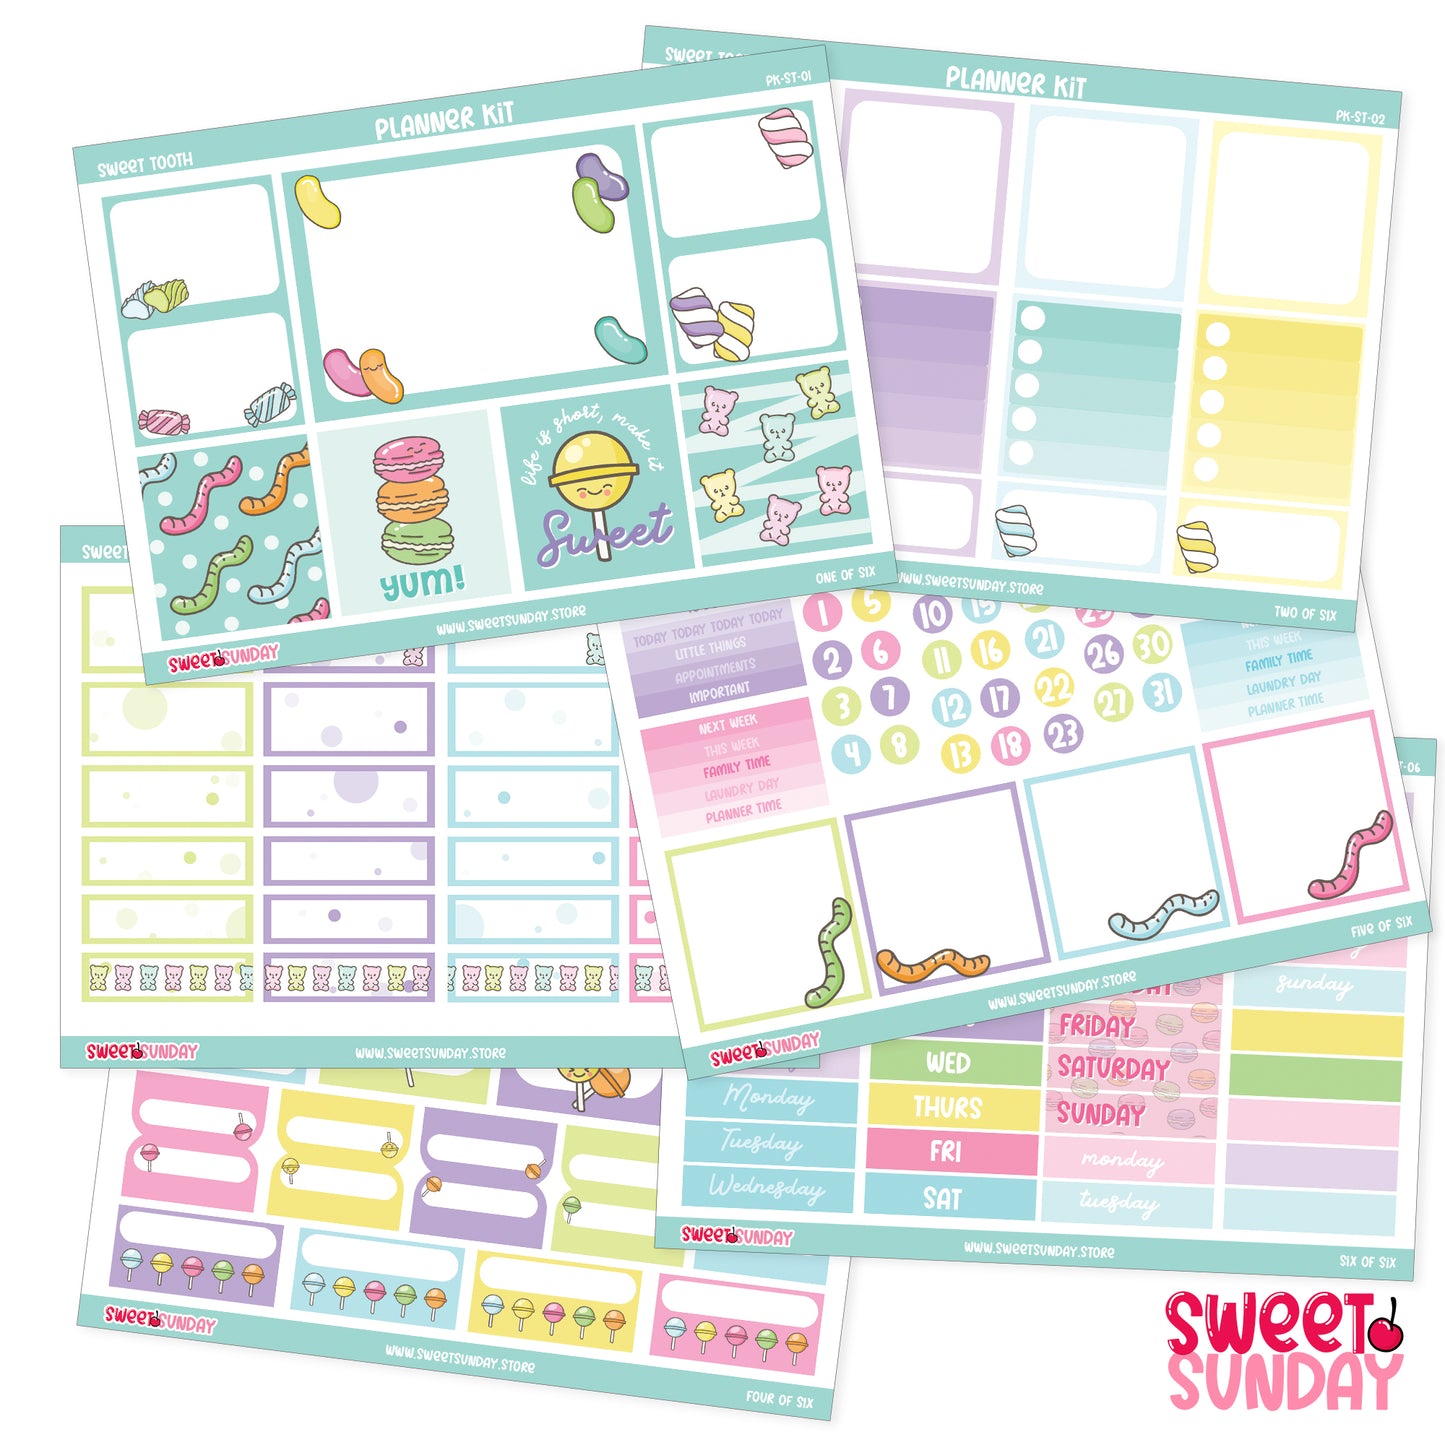 Sweet Tooth - Ultimate Pack (23 Sheets) + FREE WASHI TAPE